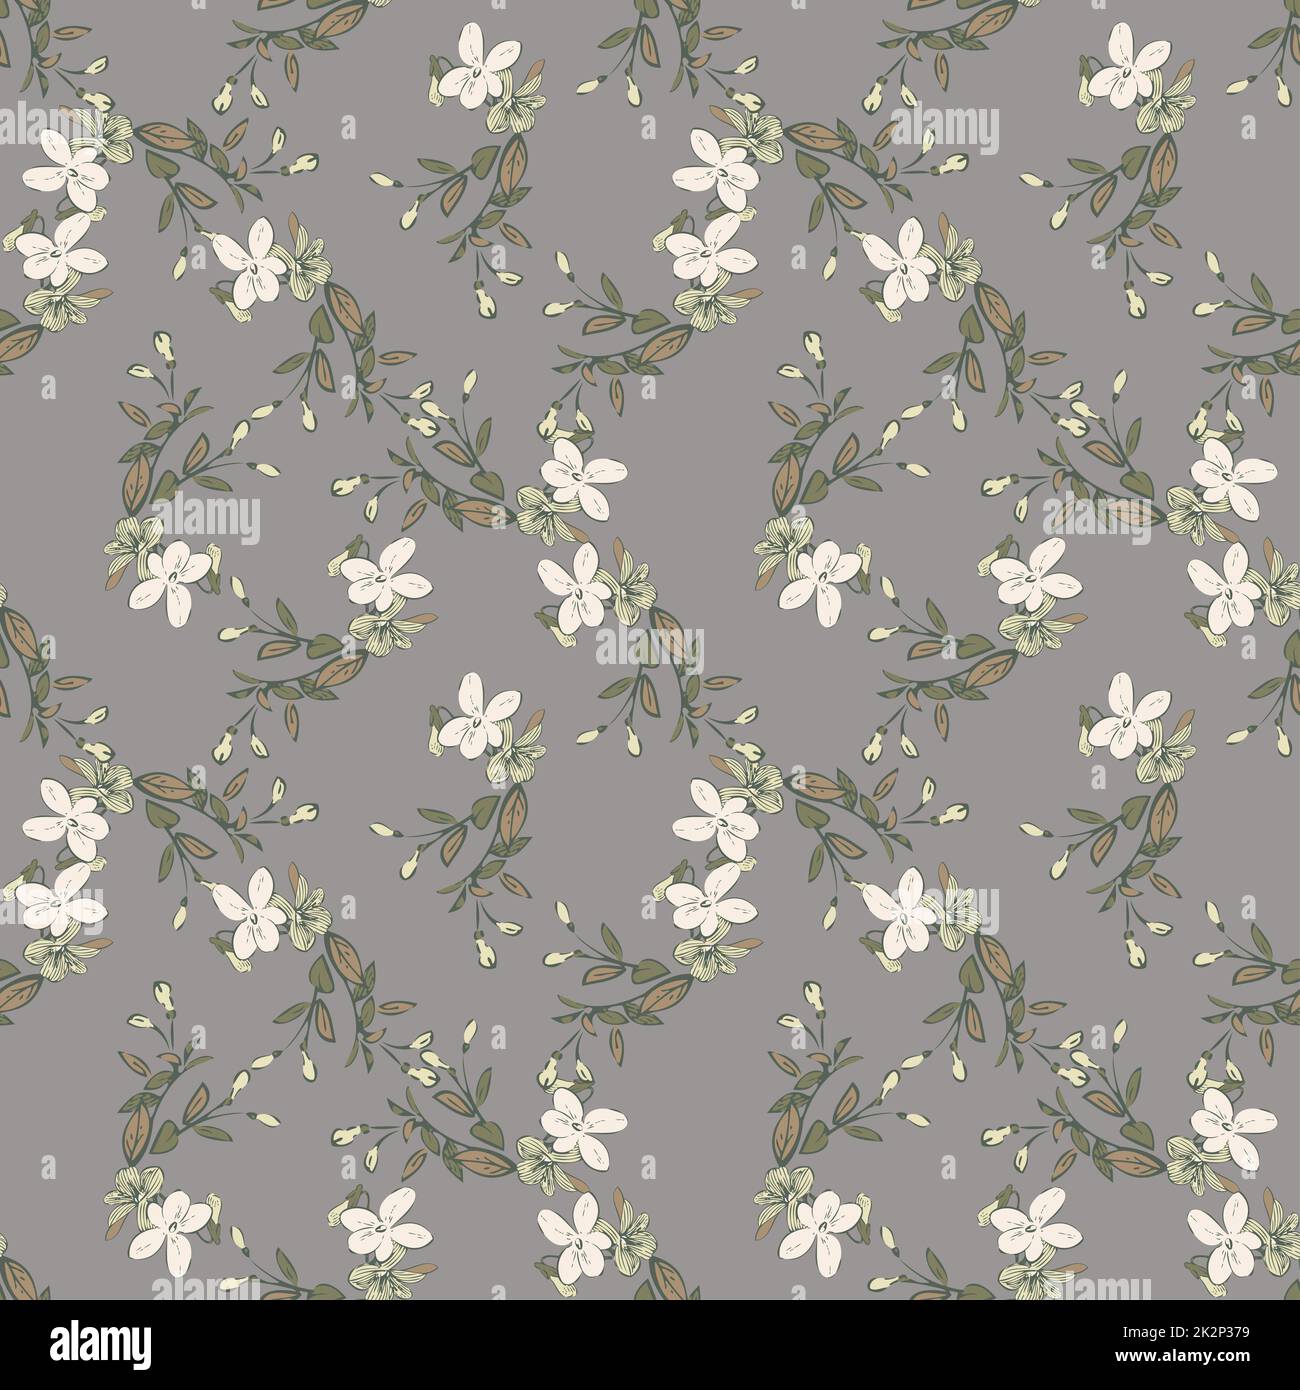 Hand draw bloom wildflowers. Cute floral abstract background seamless pattern.Botanical flowers wallpaper. Vector illustration graphic design fashion,textile, wrapping,print. Trendy grey pastel colors Stock Photo